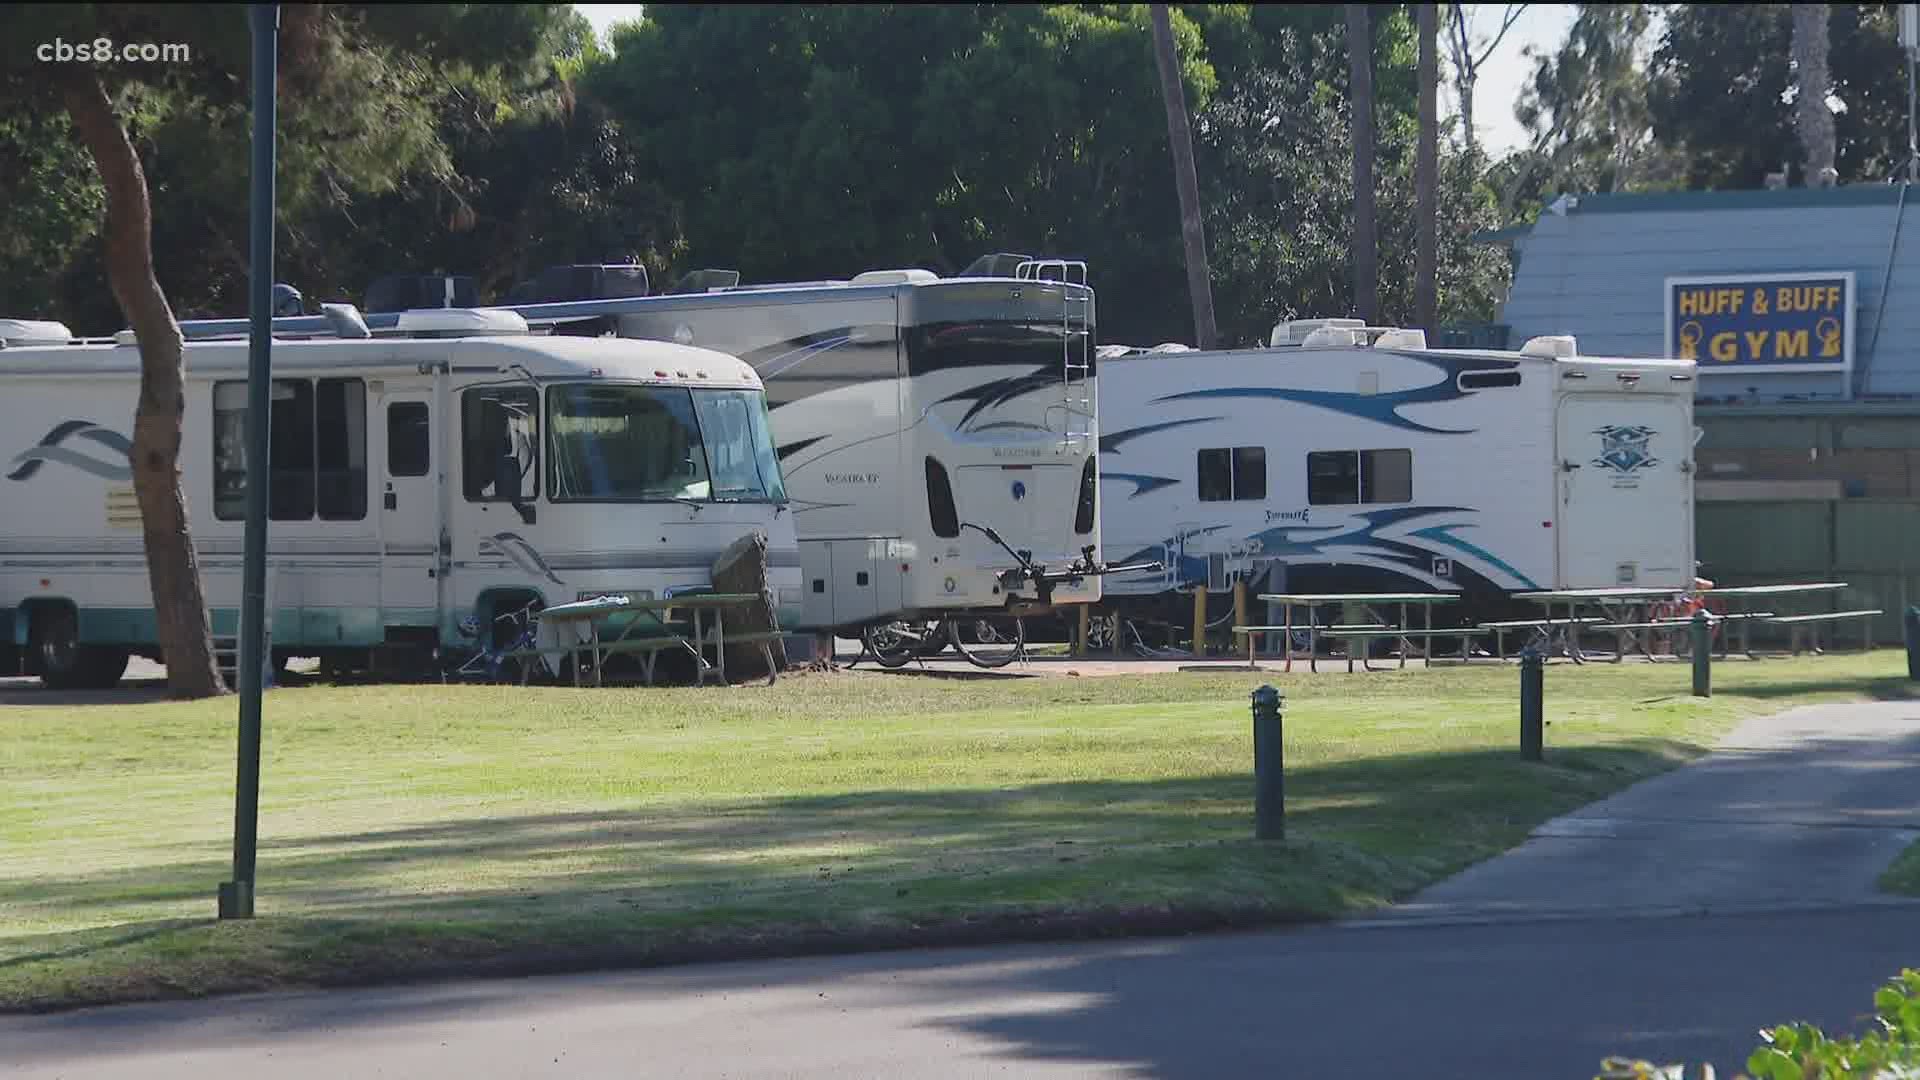 RV sales and rentals have spiked across the nation. In San Diego, online RV rental site RV Share said rentals are up 193% compared to last June.